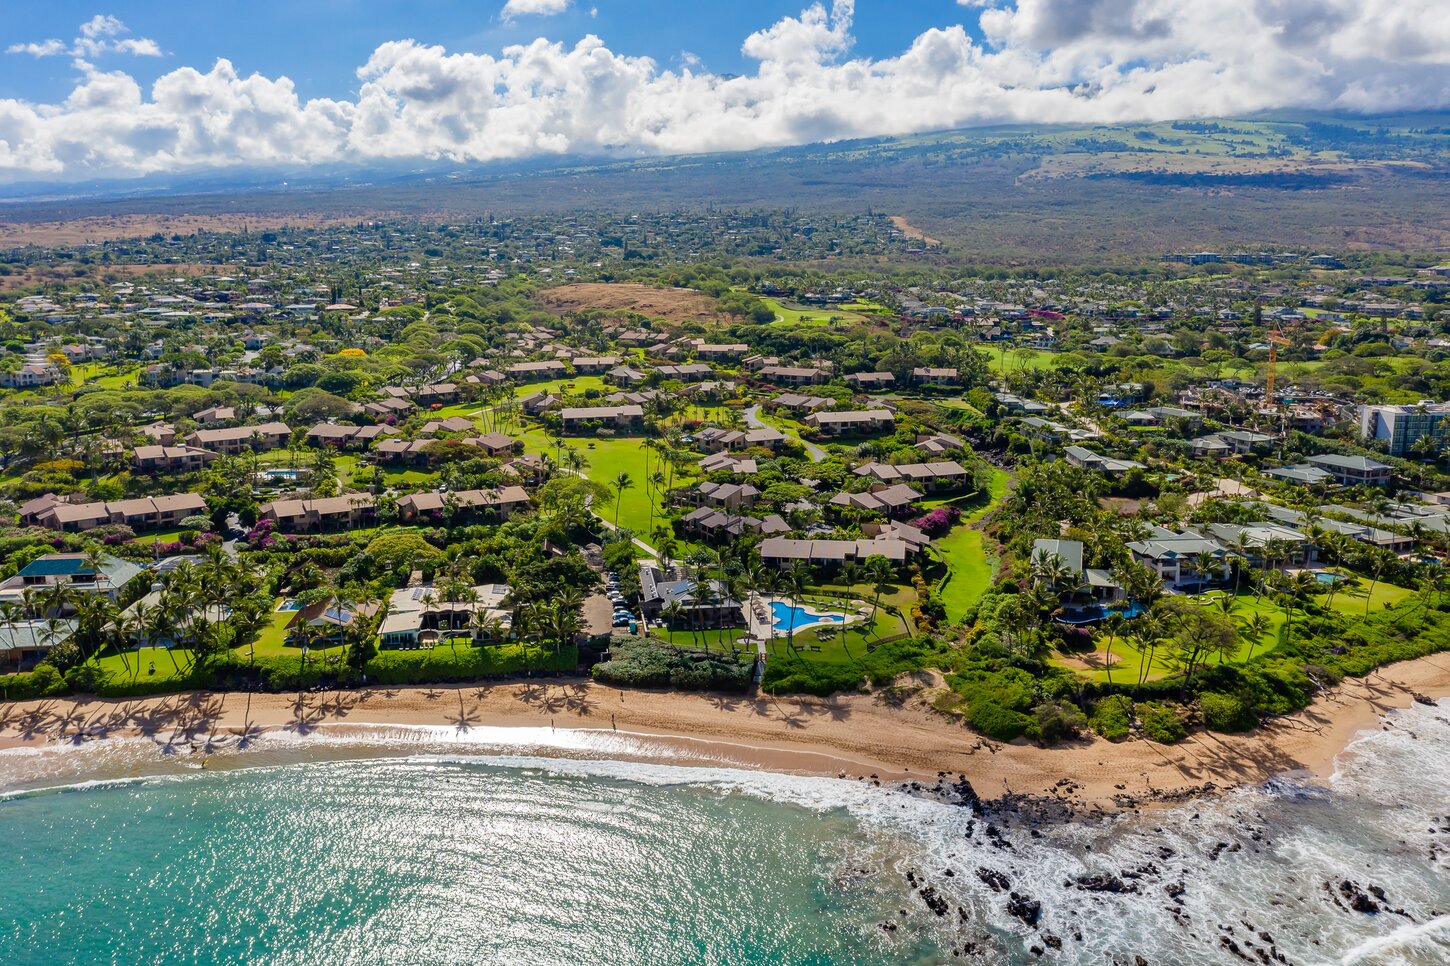 This is looking back at the best spot in Wailea from the beach.